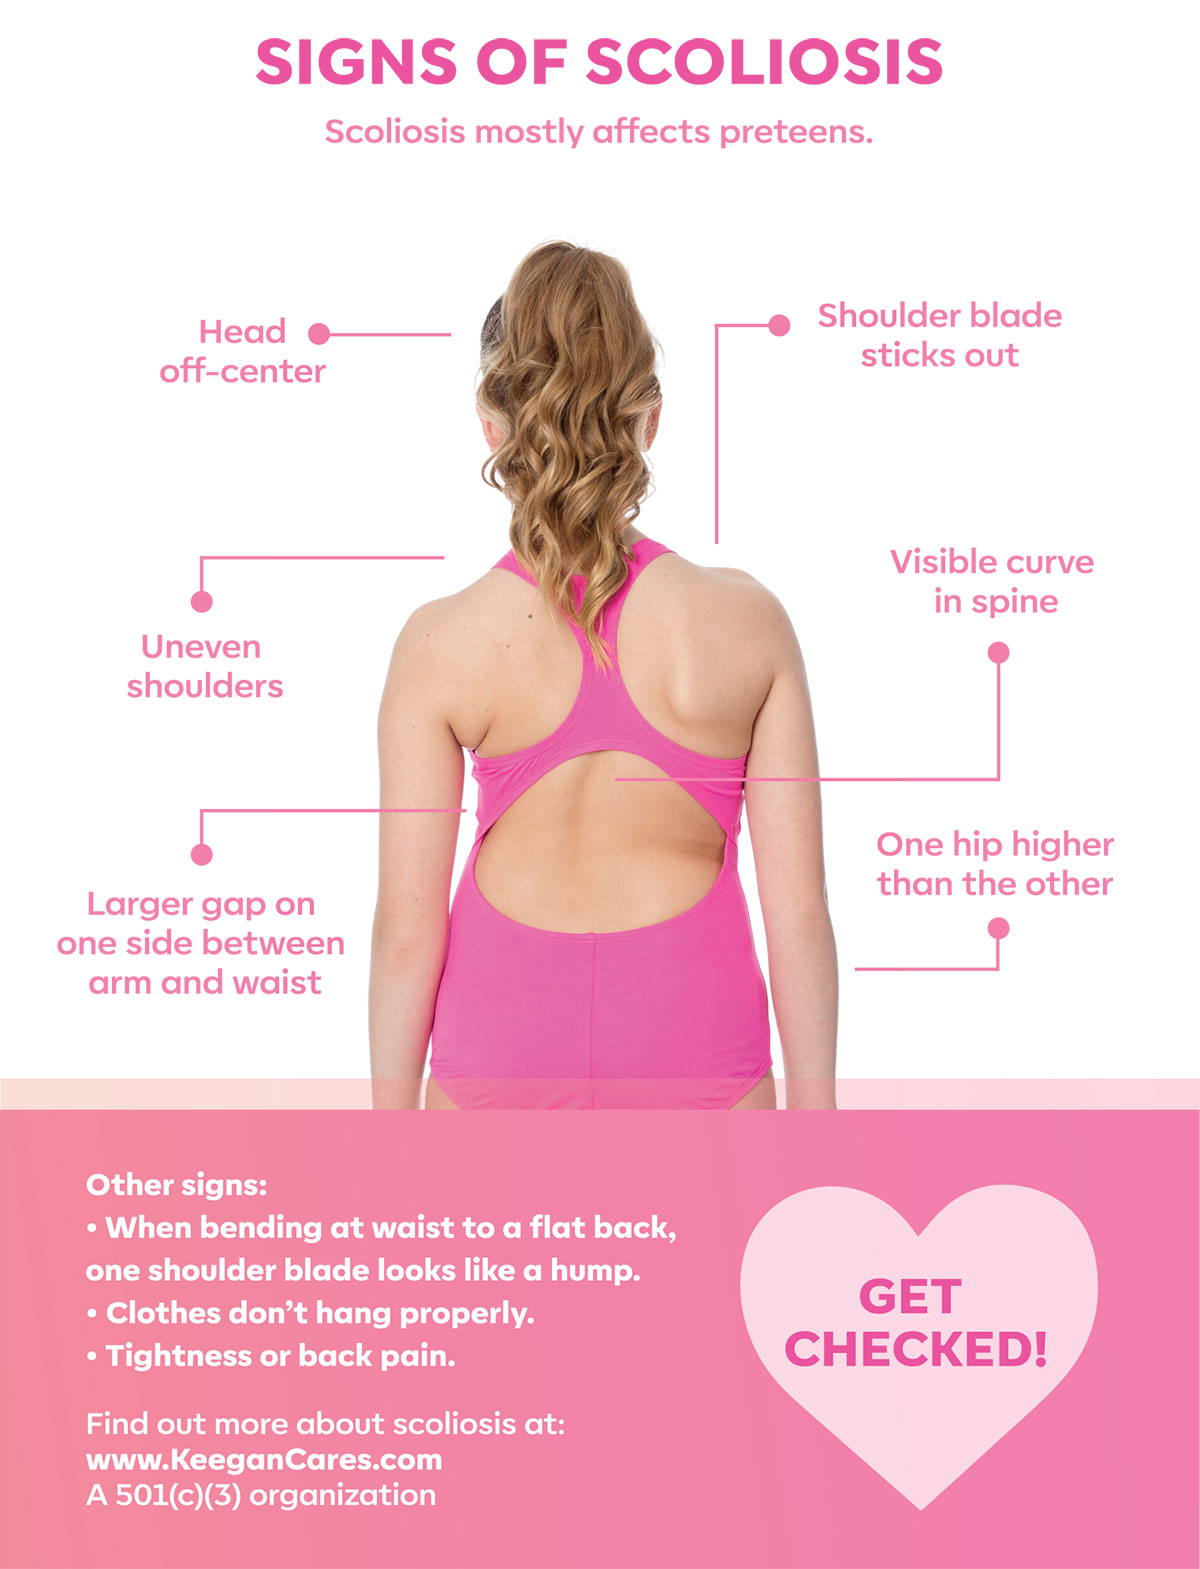 SIGNS OF SCOLIOSIS